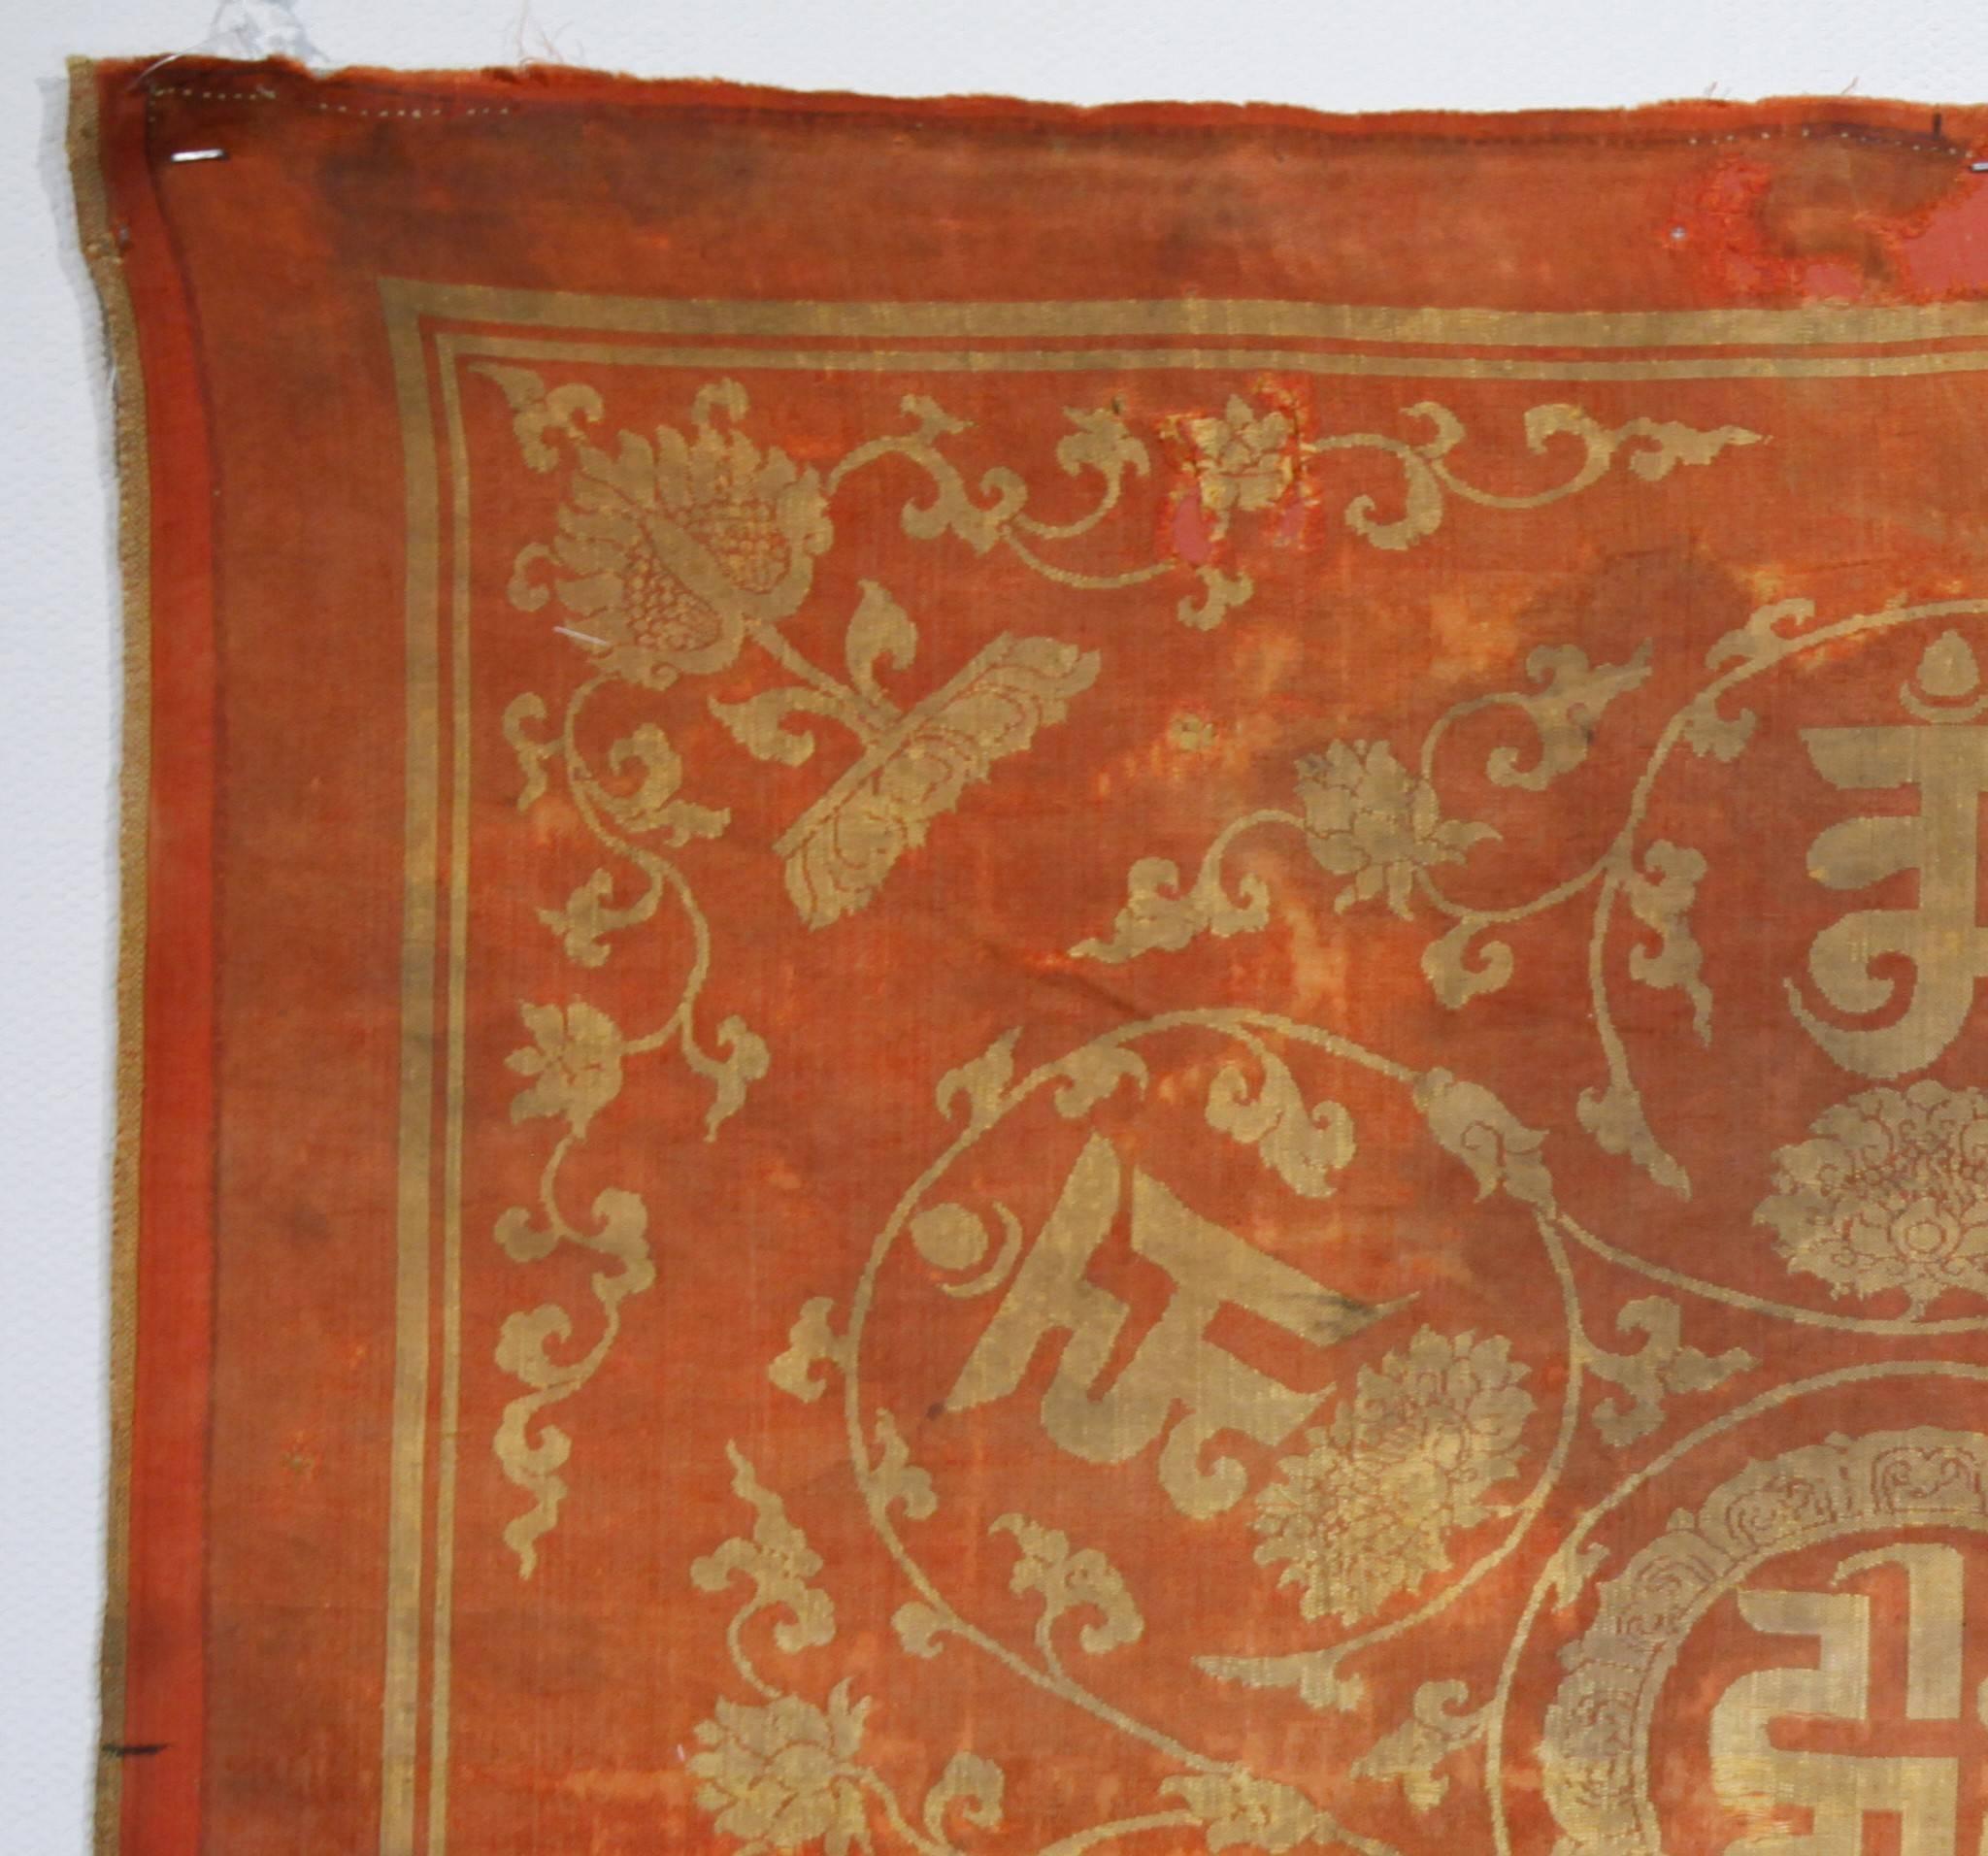 woven chinese silk with om mani padme hum 
Size: 73x63cm 
circa 16th century
   

In later imperial China and in Tibet, Vajrayana or Tantric Buddhism flourished and was supported by the rulers in both regions. The high level of textile